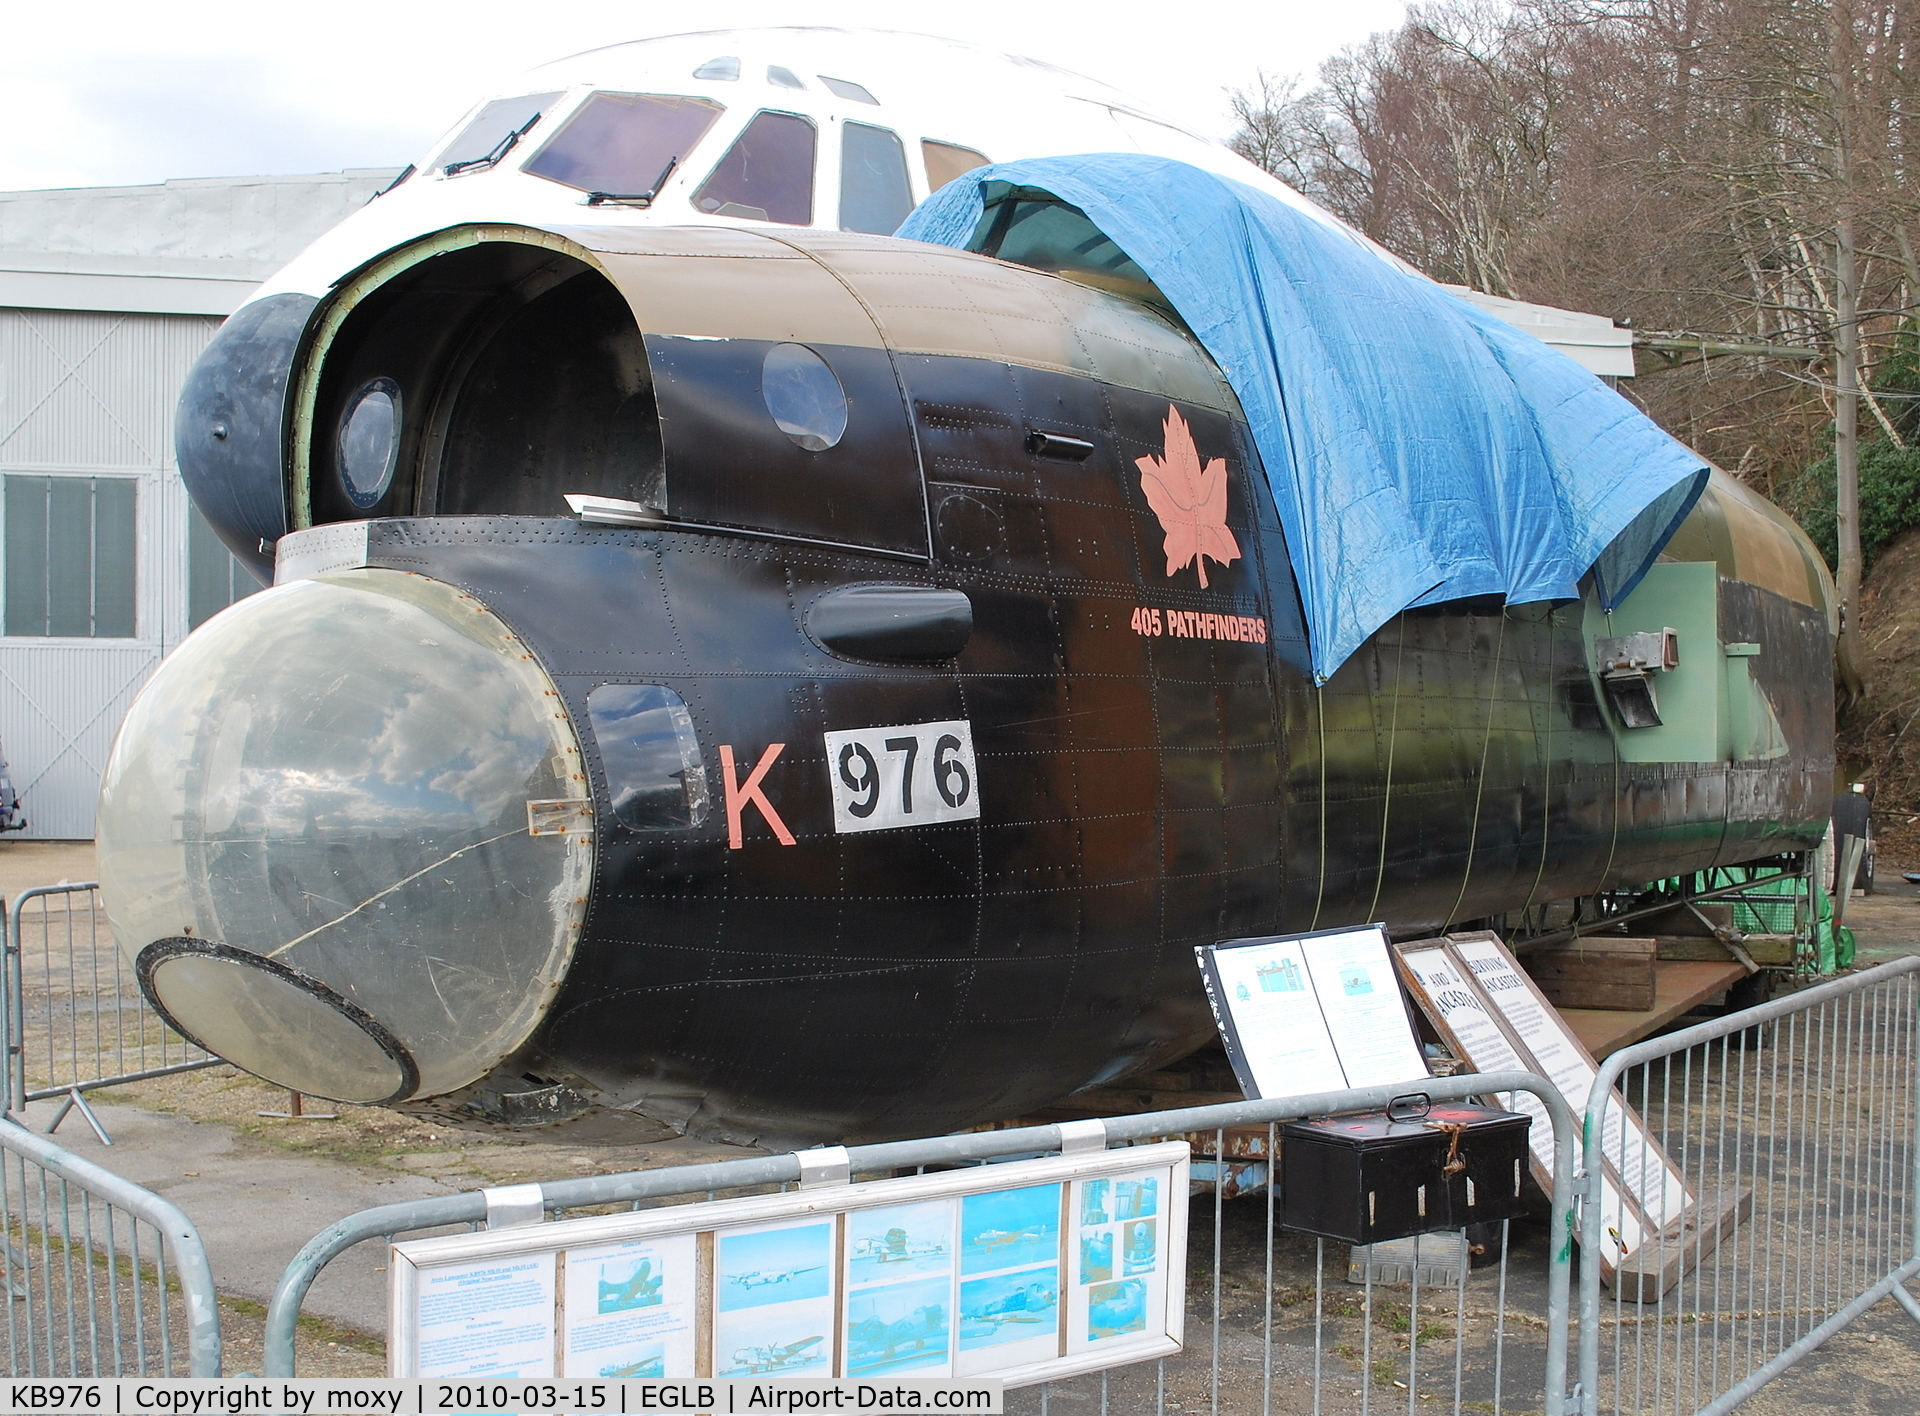 KB976, 1944 Victory Aircraft Avro 683 Lancaster B10 AR C/N 277, Lancaster BX Nose Ex RCAF at Brooklands. Kermit Weekes has the rest of this aeroplane in Florida I believe.